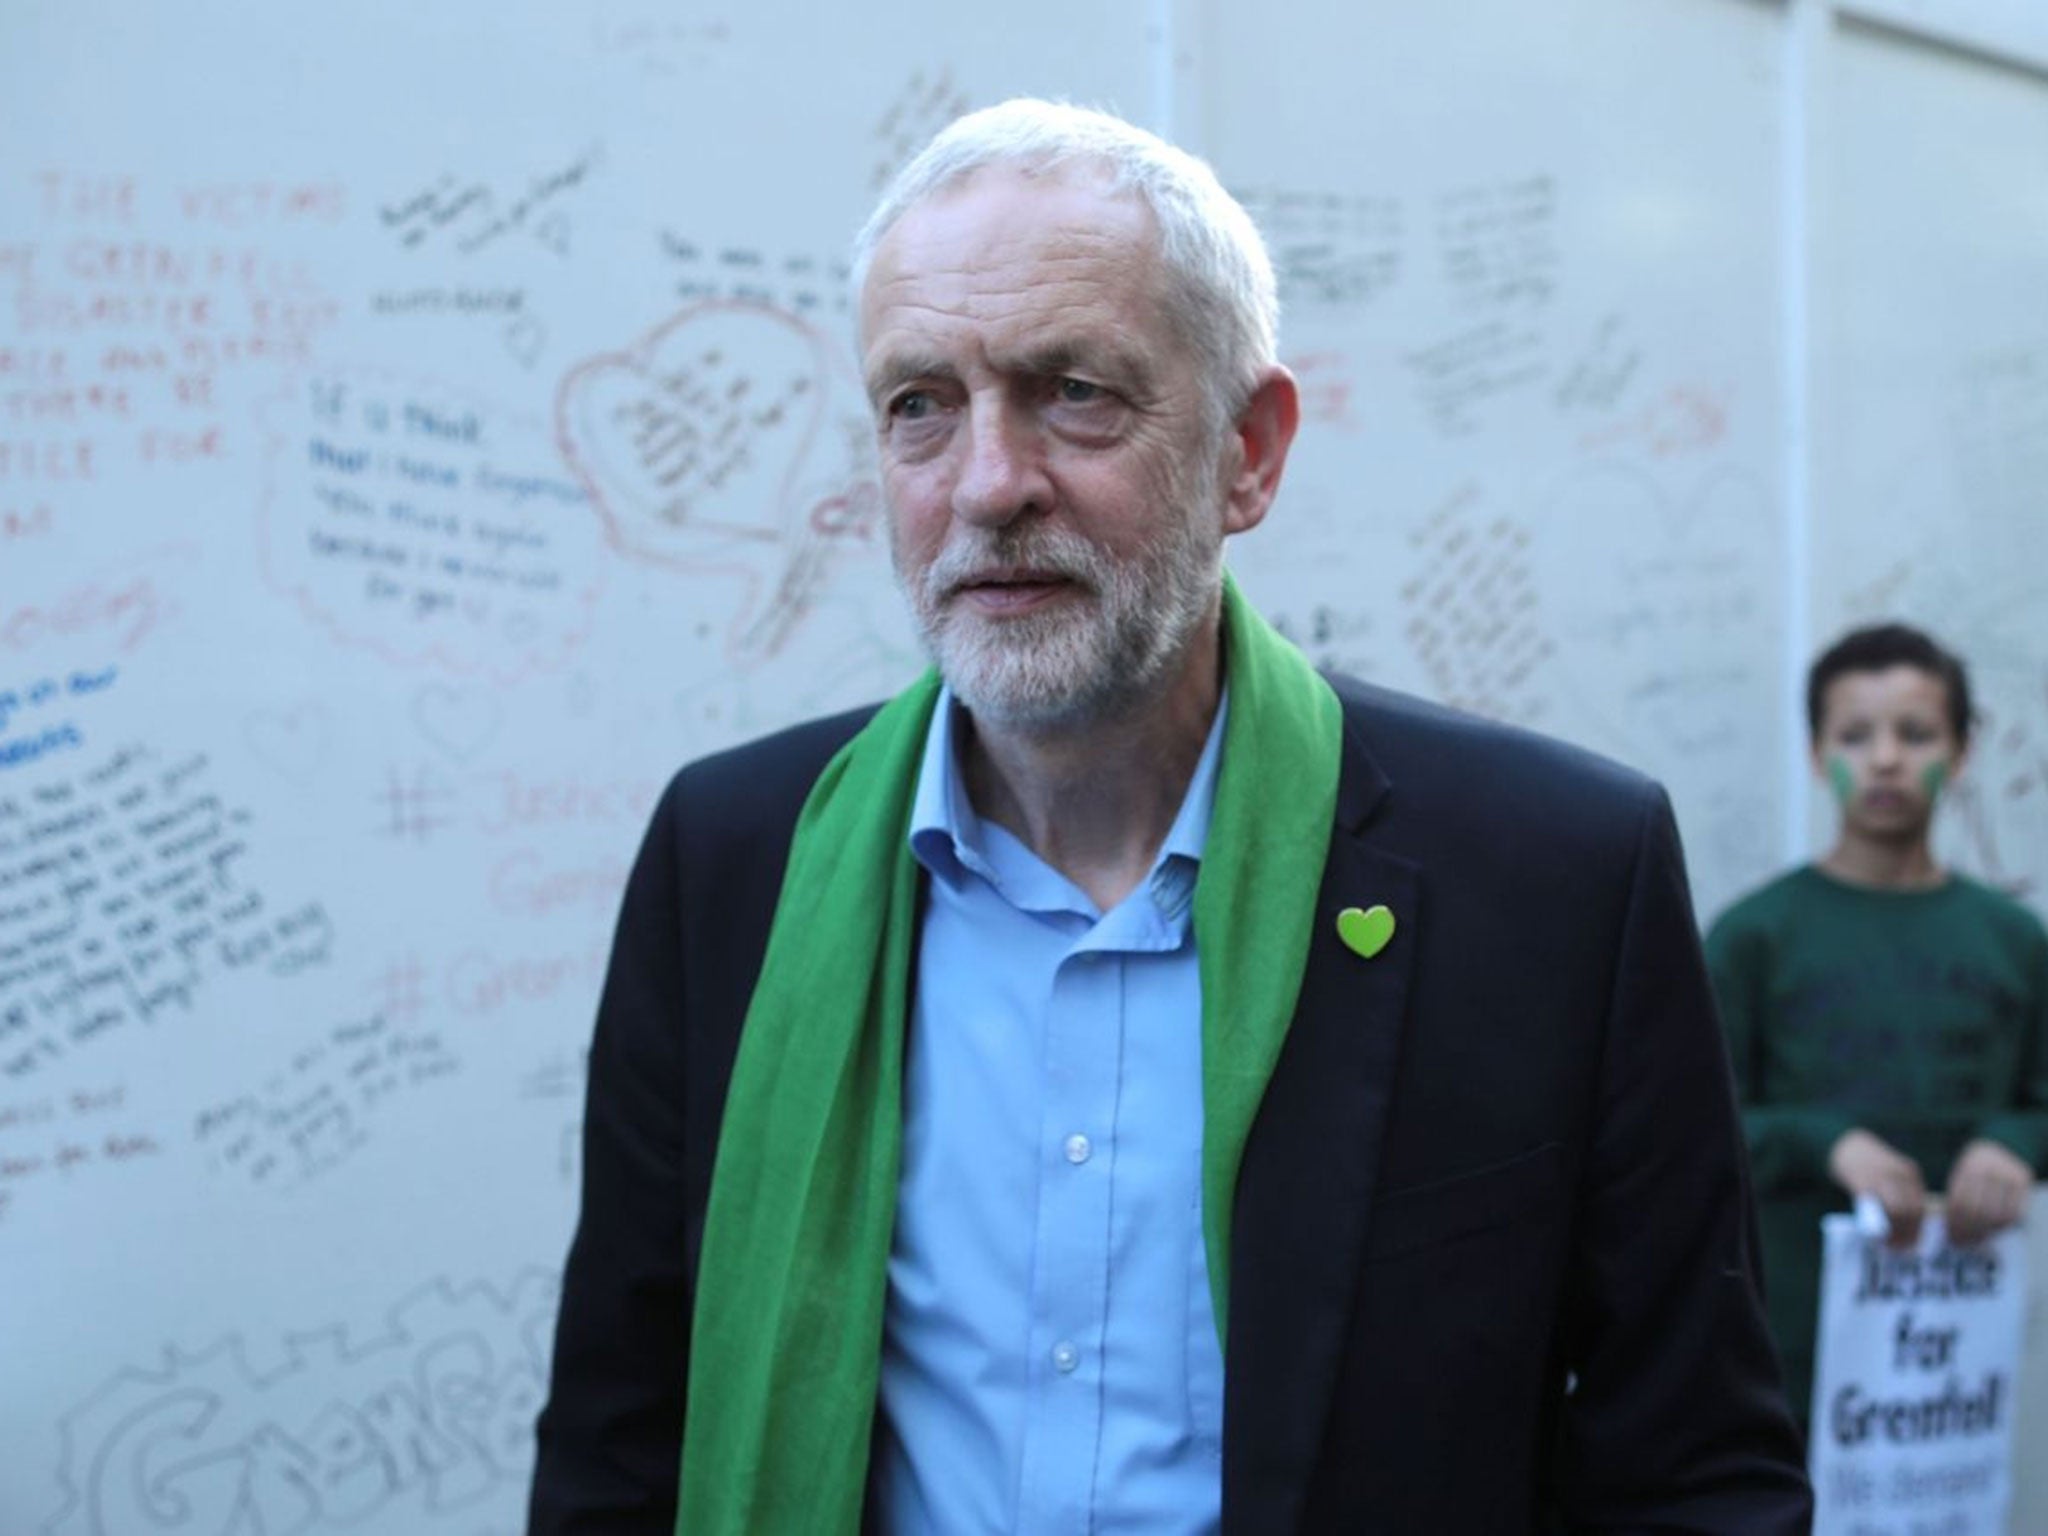 Jeremy Corbyn meets members of the public by a memorial wall on the one year anniversary of the Grenfell Tower fire on 14 June, 2018